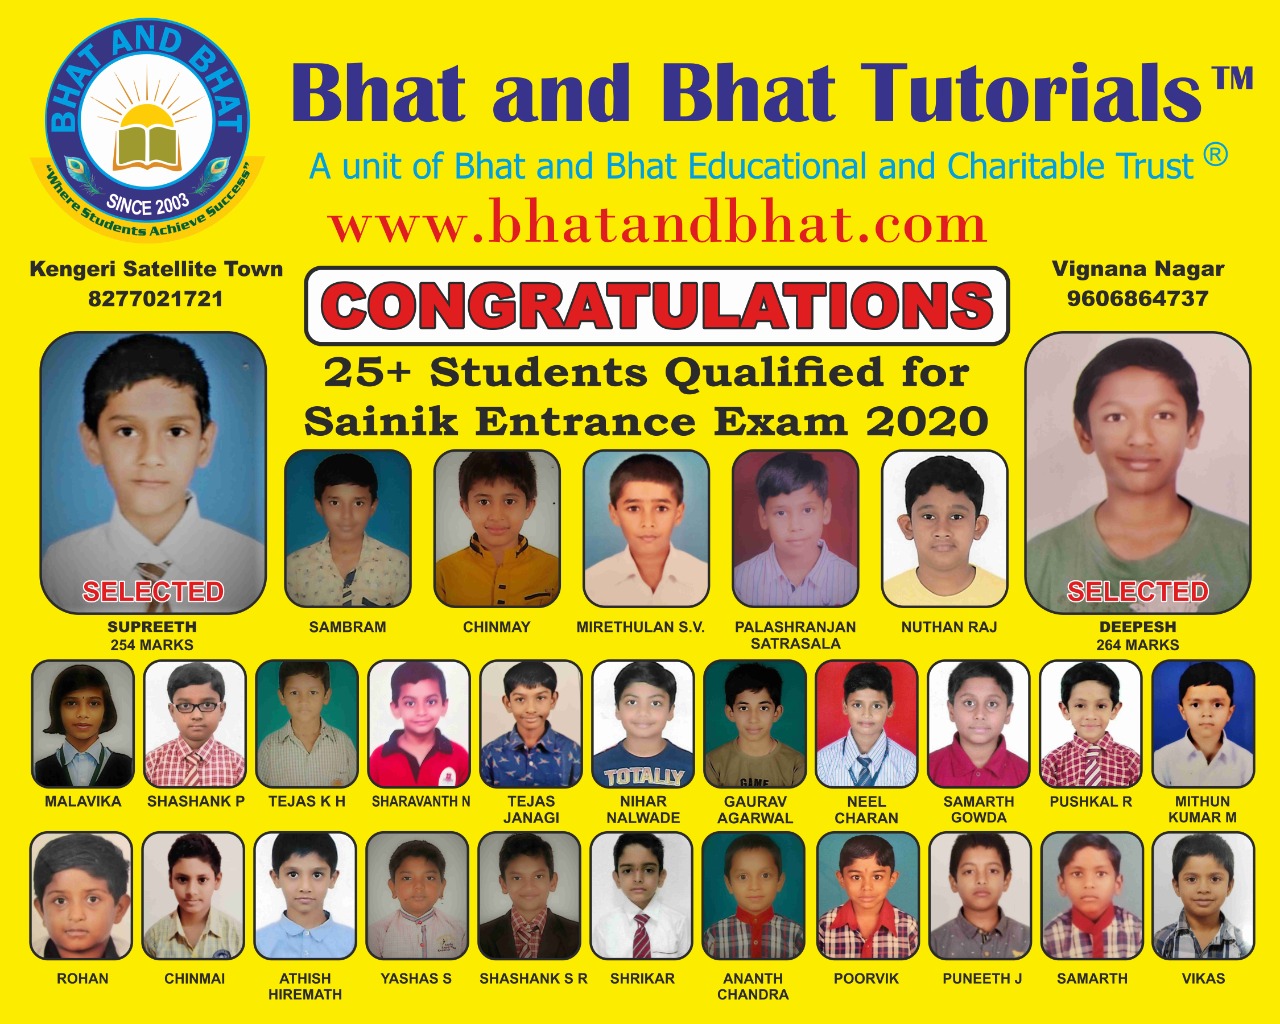 Bhat and Bhat Tutorial